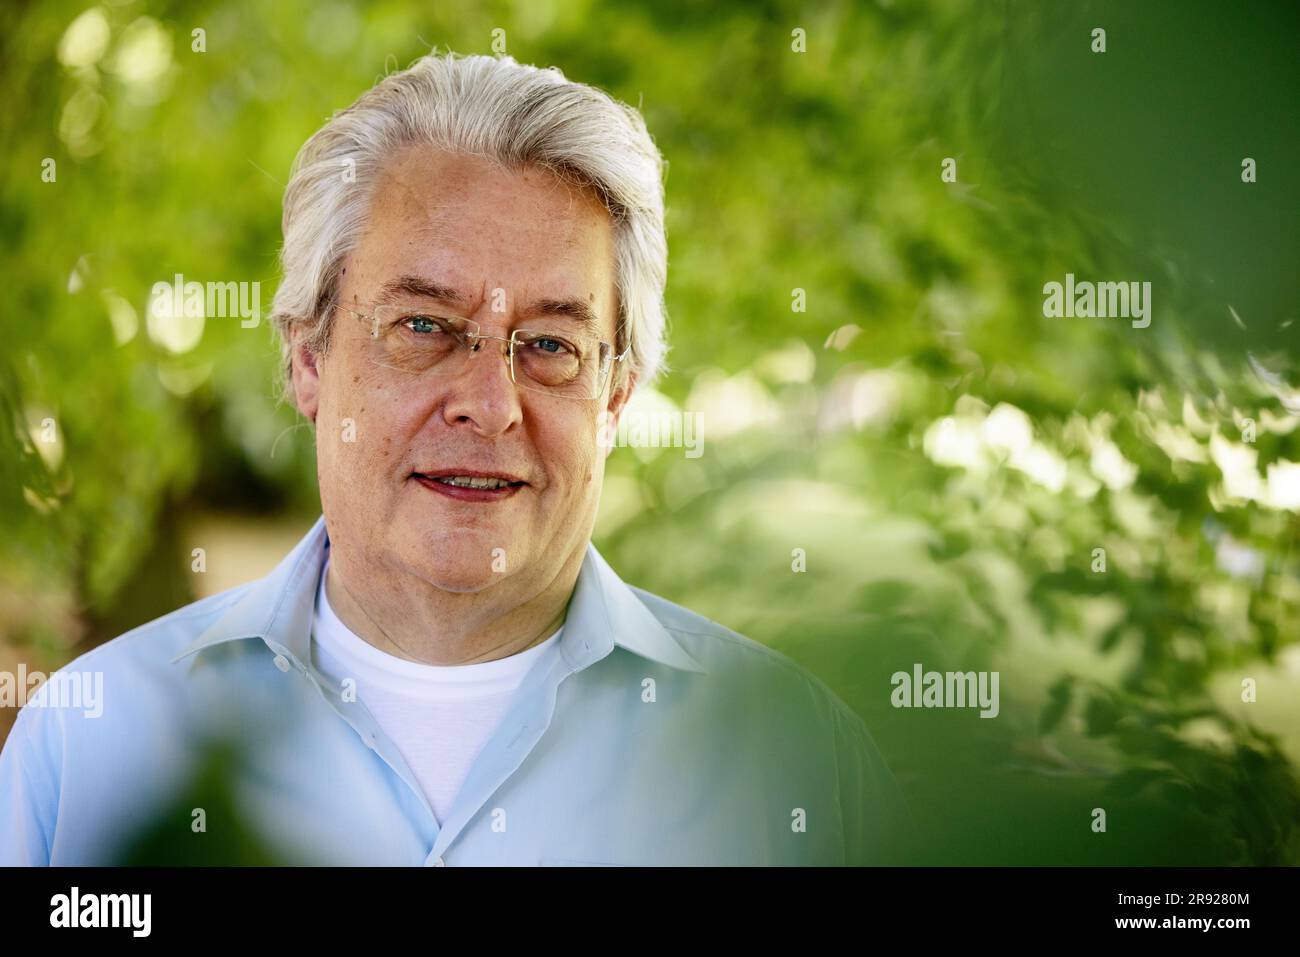 Senior man with gray hair smiling in park Stock Photo